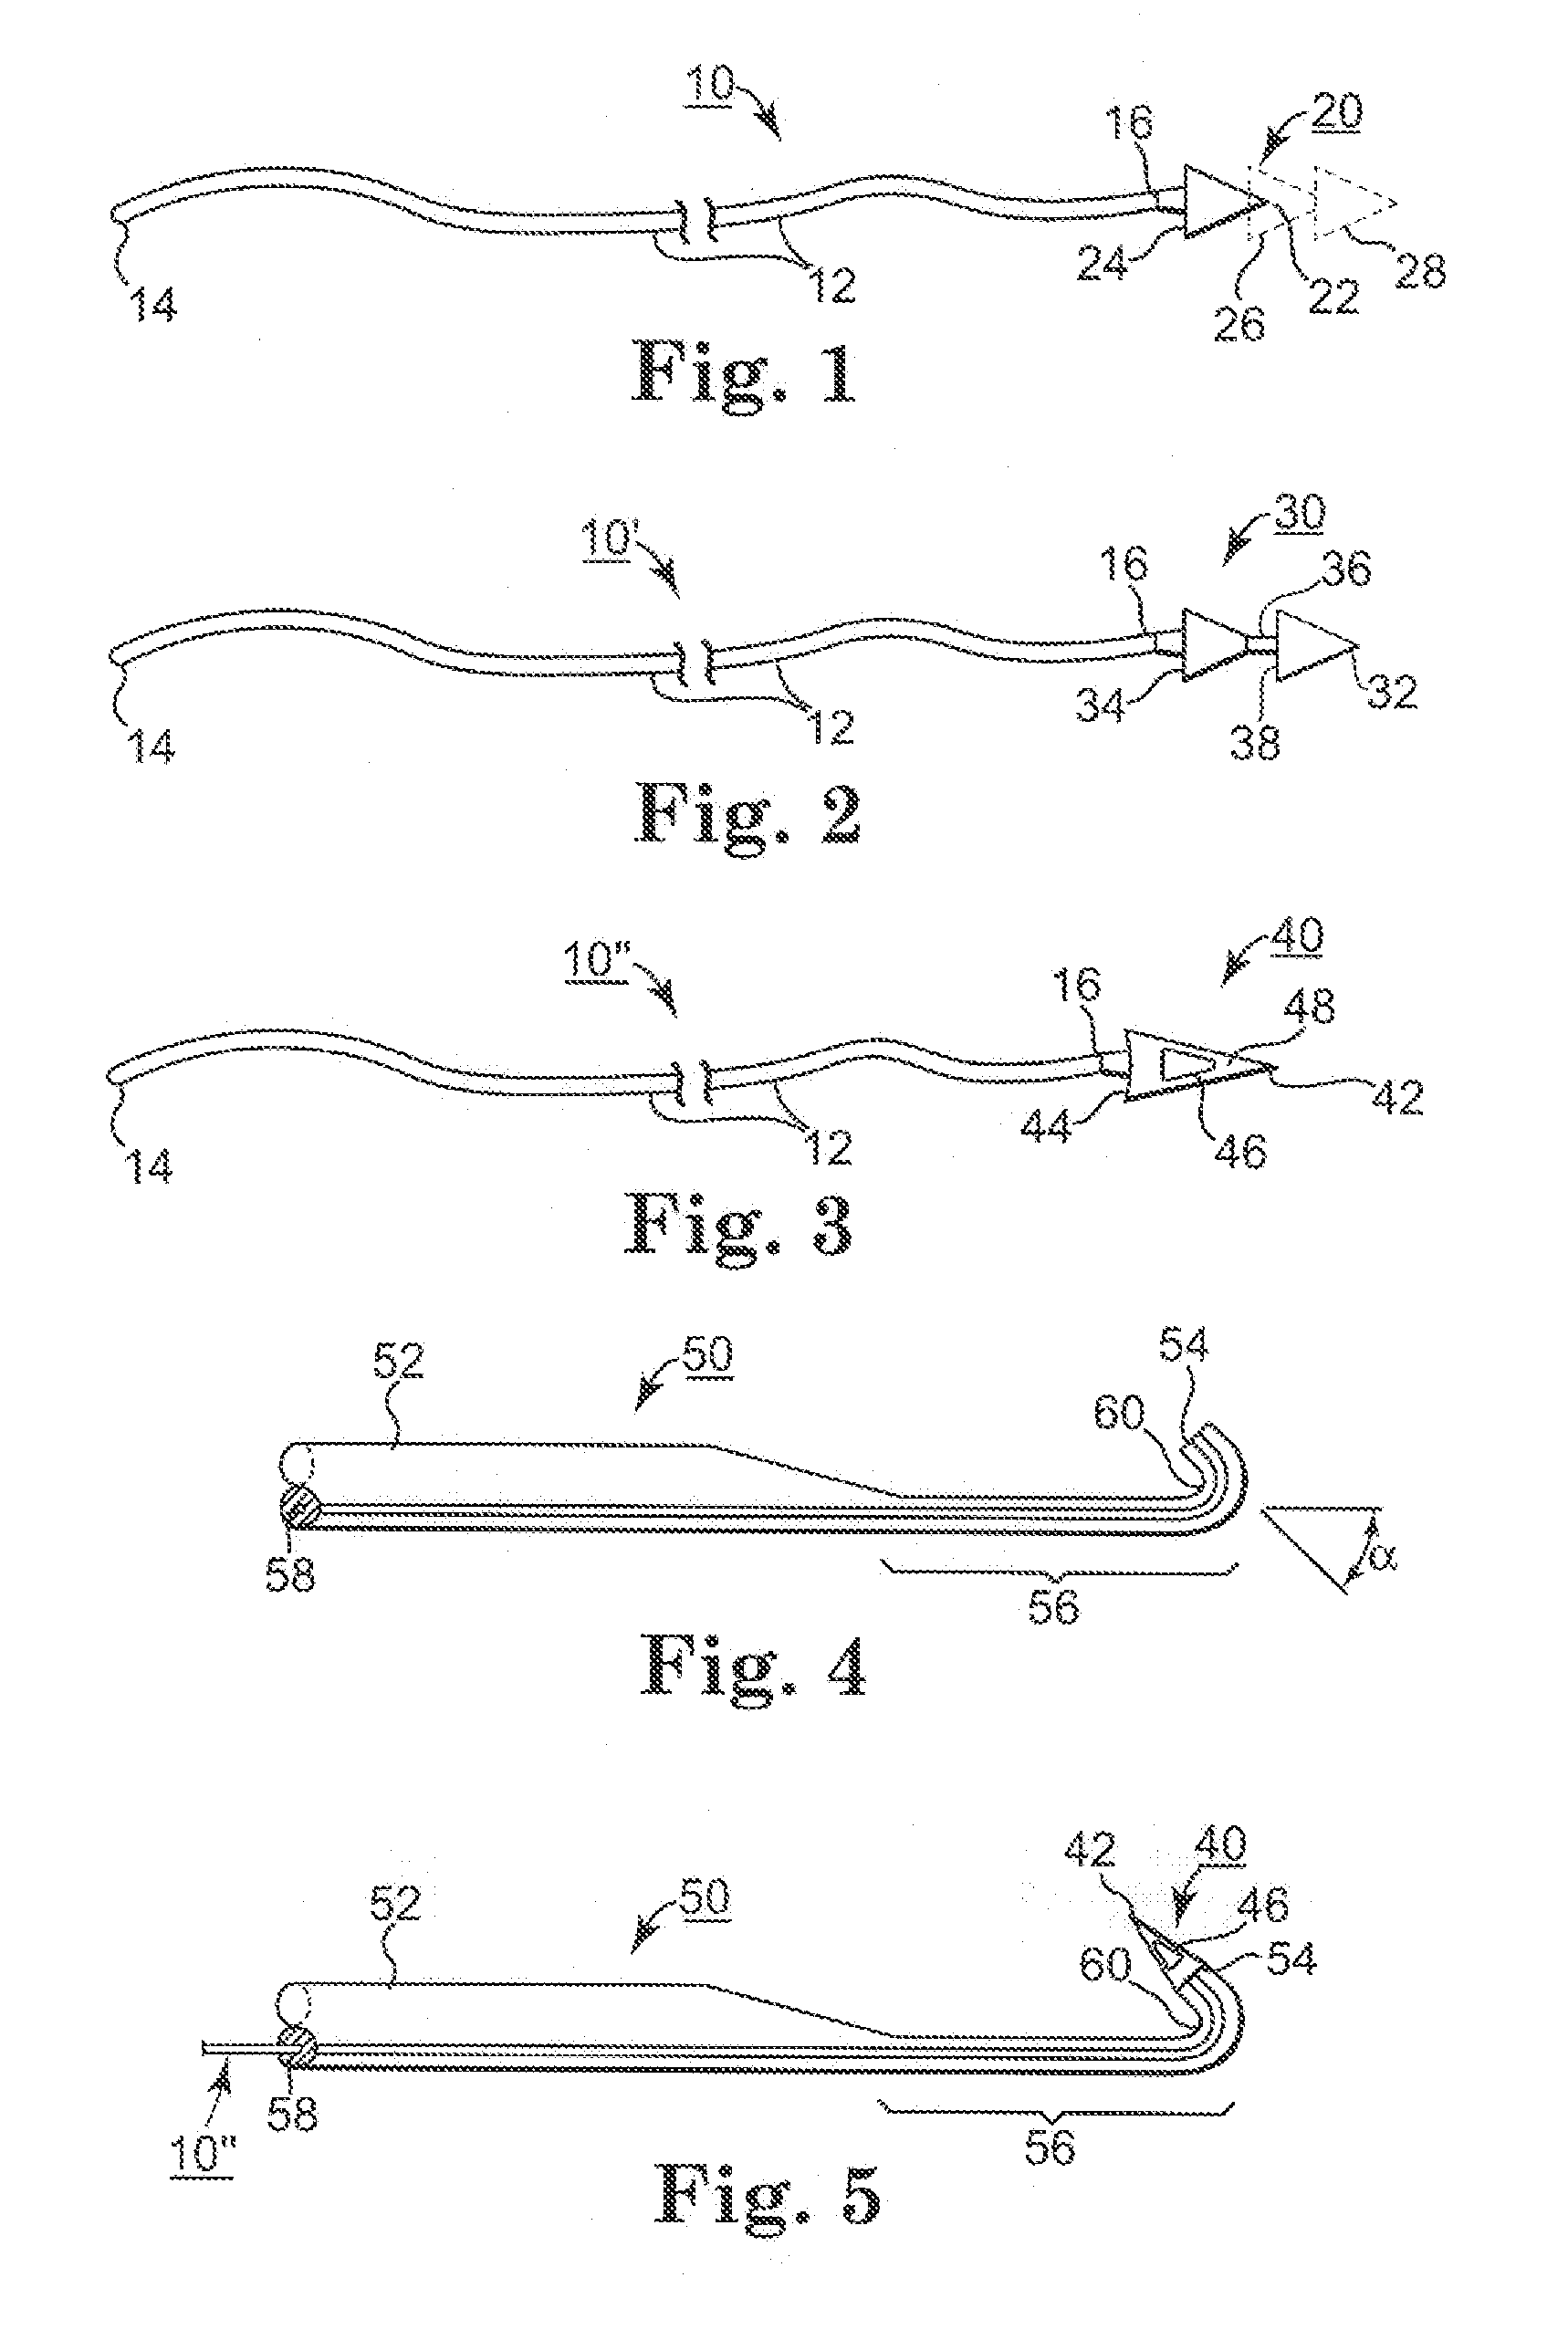 Minimally Invasive Methods and Apparatus for Accessing and Ligating Uterine Arteries with Sutures